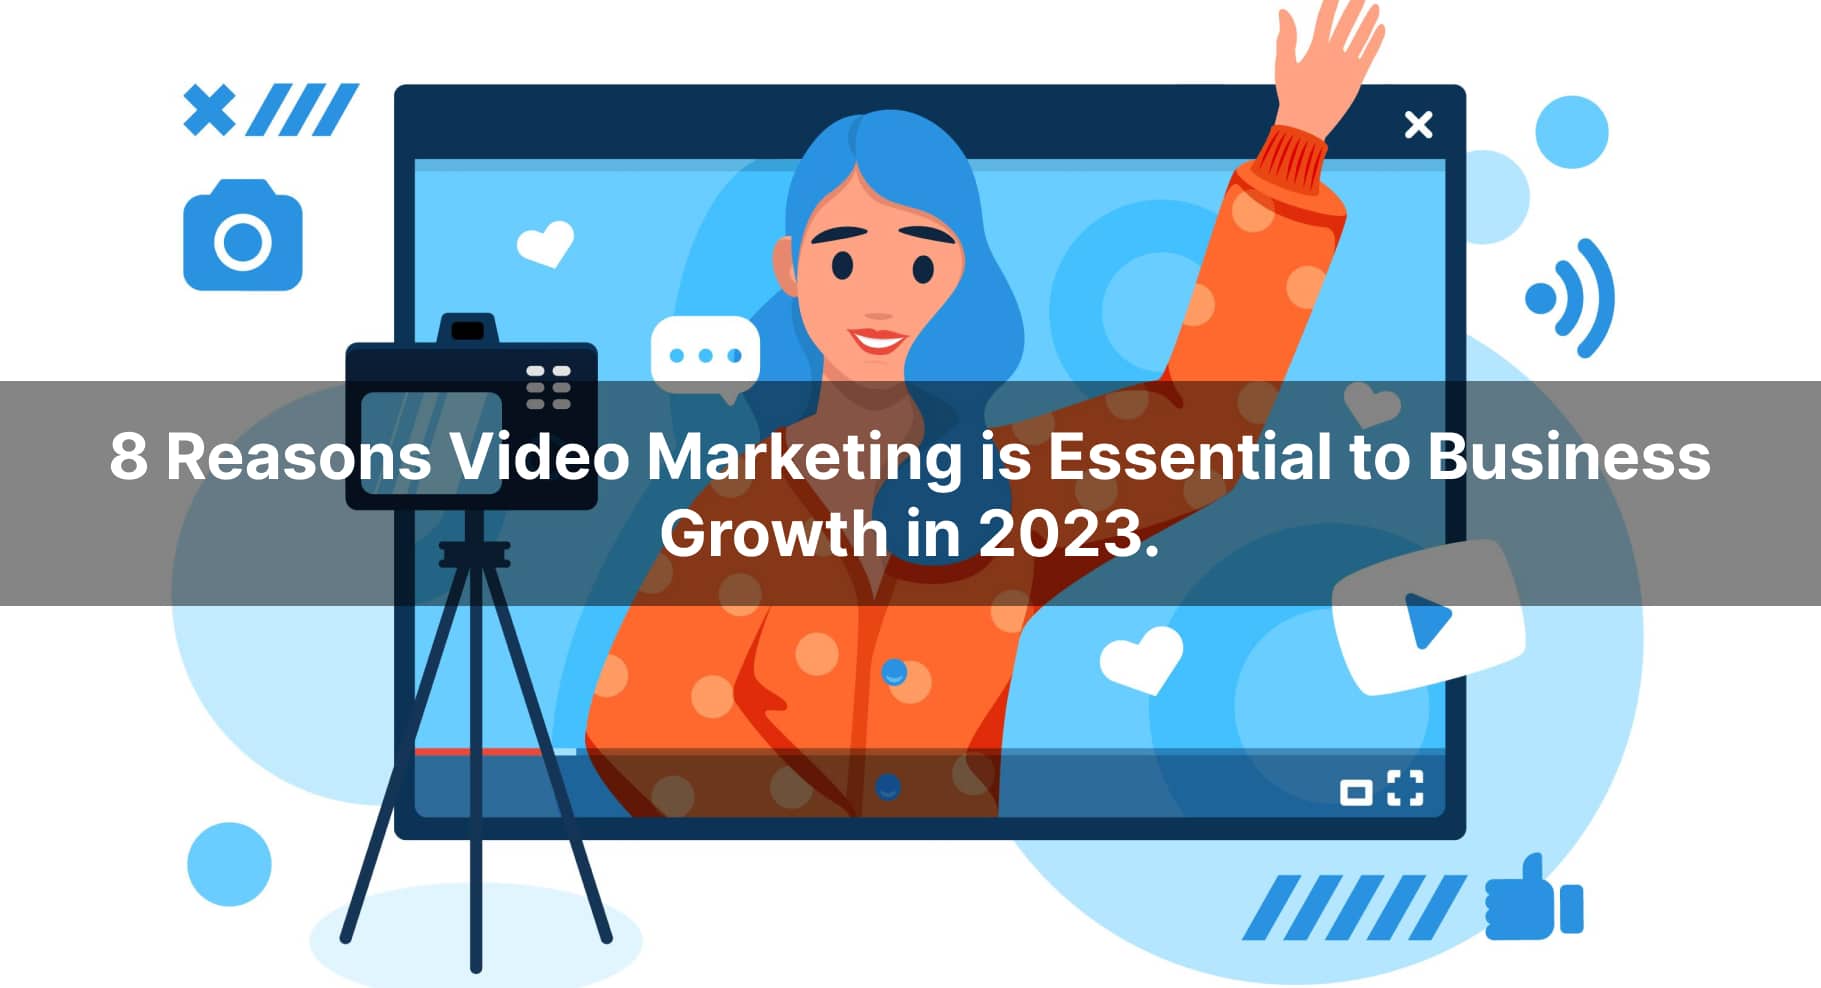 8 Reasons Video Marketing is Essential to Business Growth in 2023.